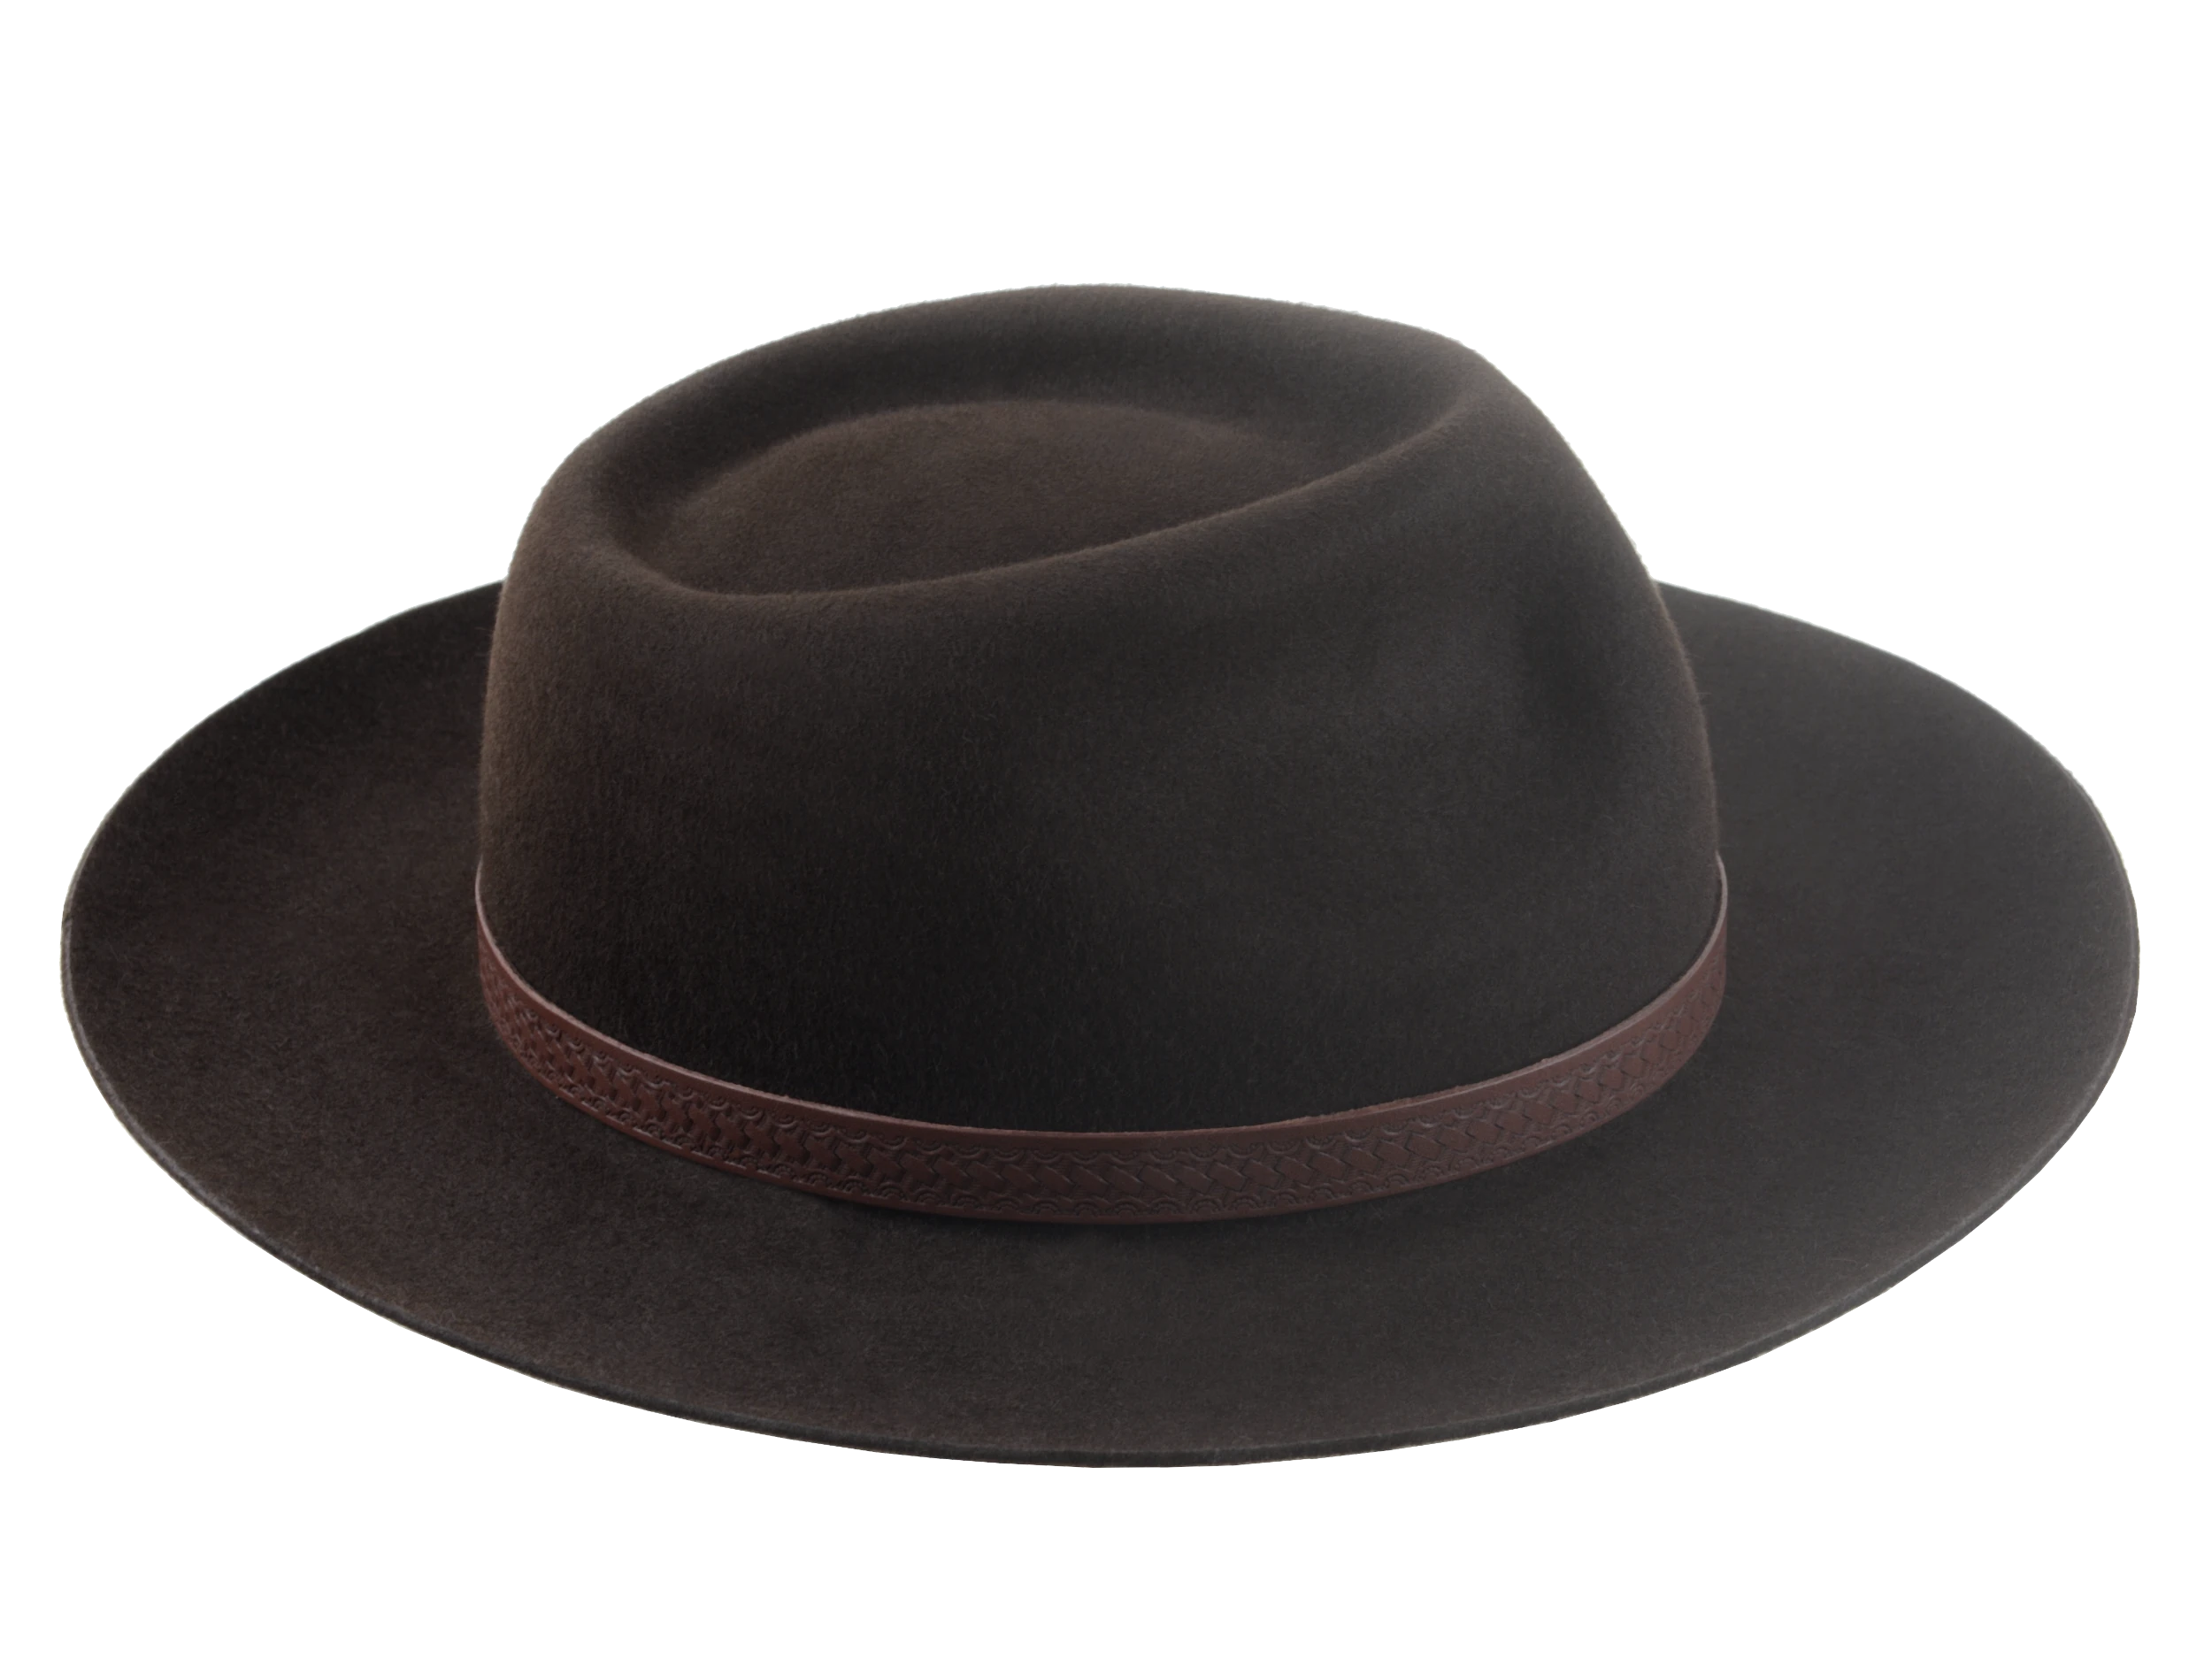 The Magnet: Highlighting the 2 3/4" raw-edge fedora brim and overall proportions | Agnoulita Hats